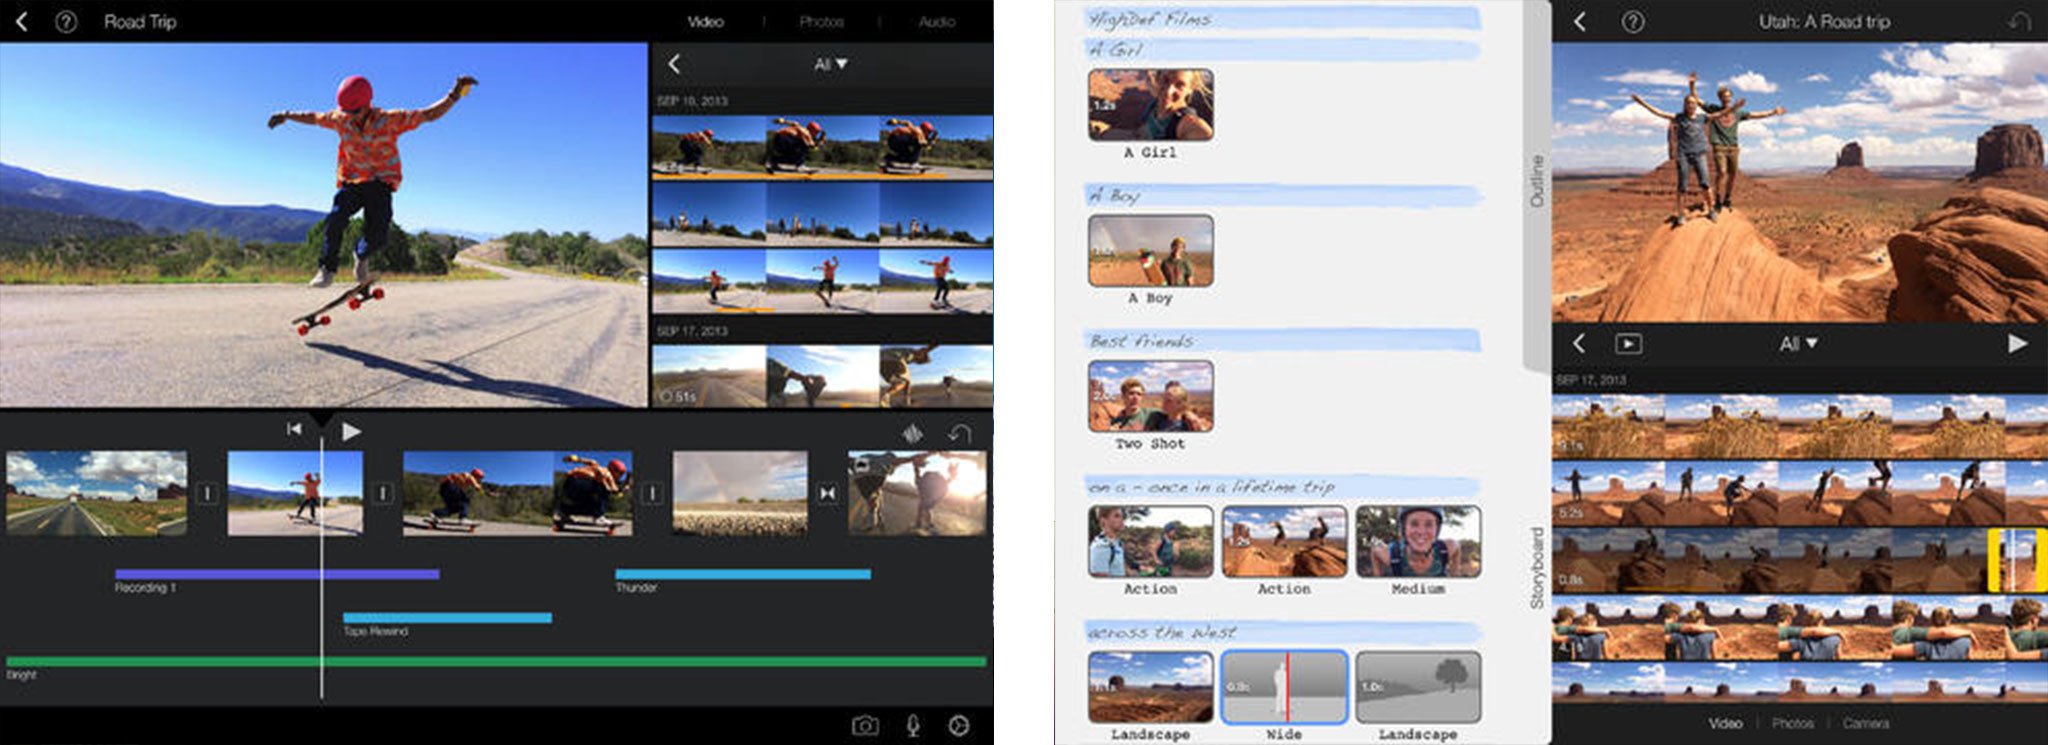 Best video editing apps for iPad: iMovie